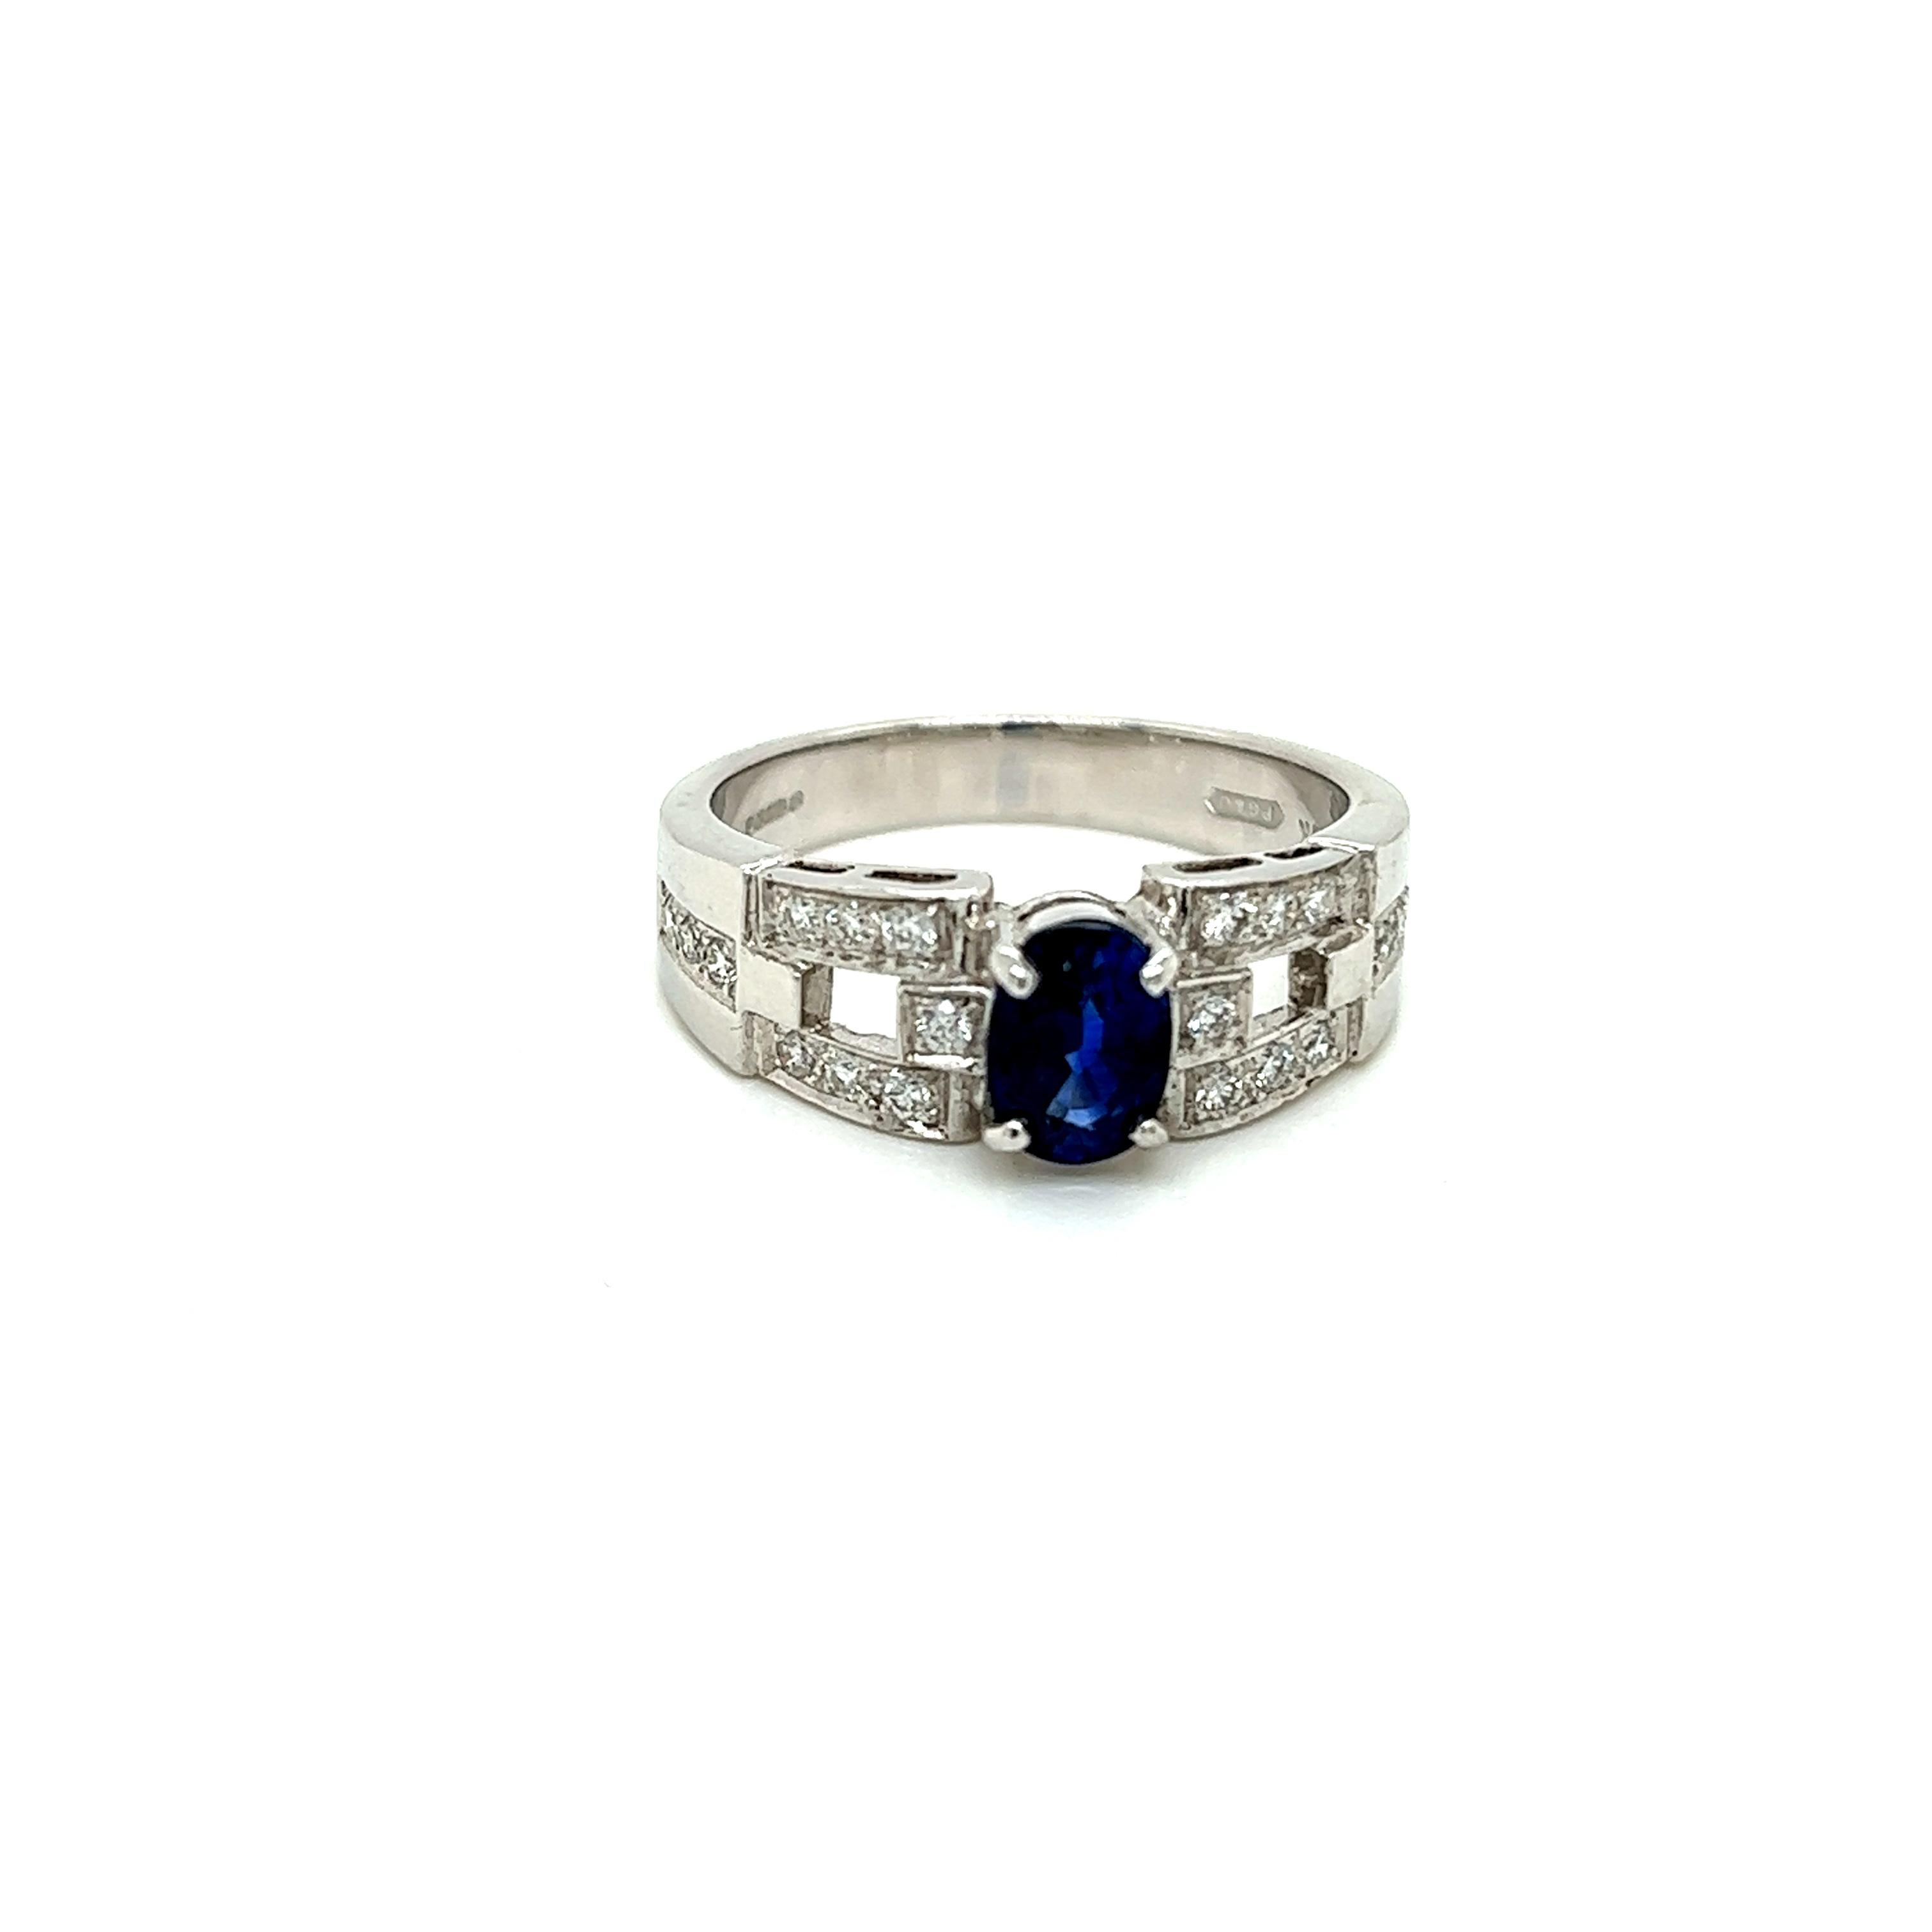 This stunning ring features an alluring Blue Sapphire held in a claw setting on a unique 18K White Gold band. Encrusted on the band are iridescent Round Brilliant Diamonds arranged in a contemporary chequered pattern.

The Oval cut Blue Sapphire